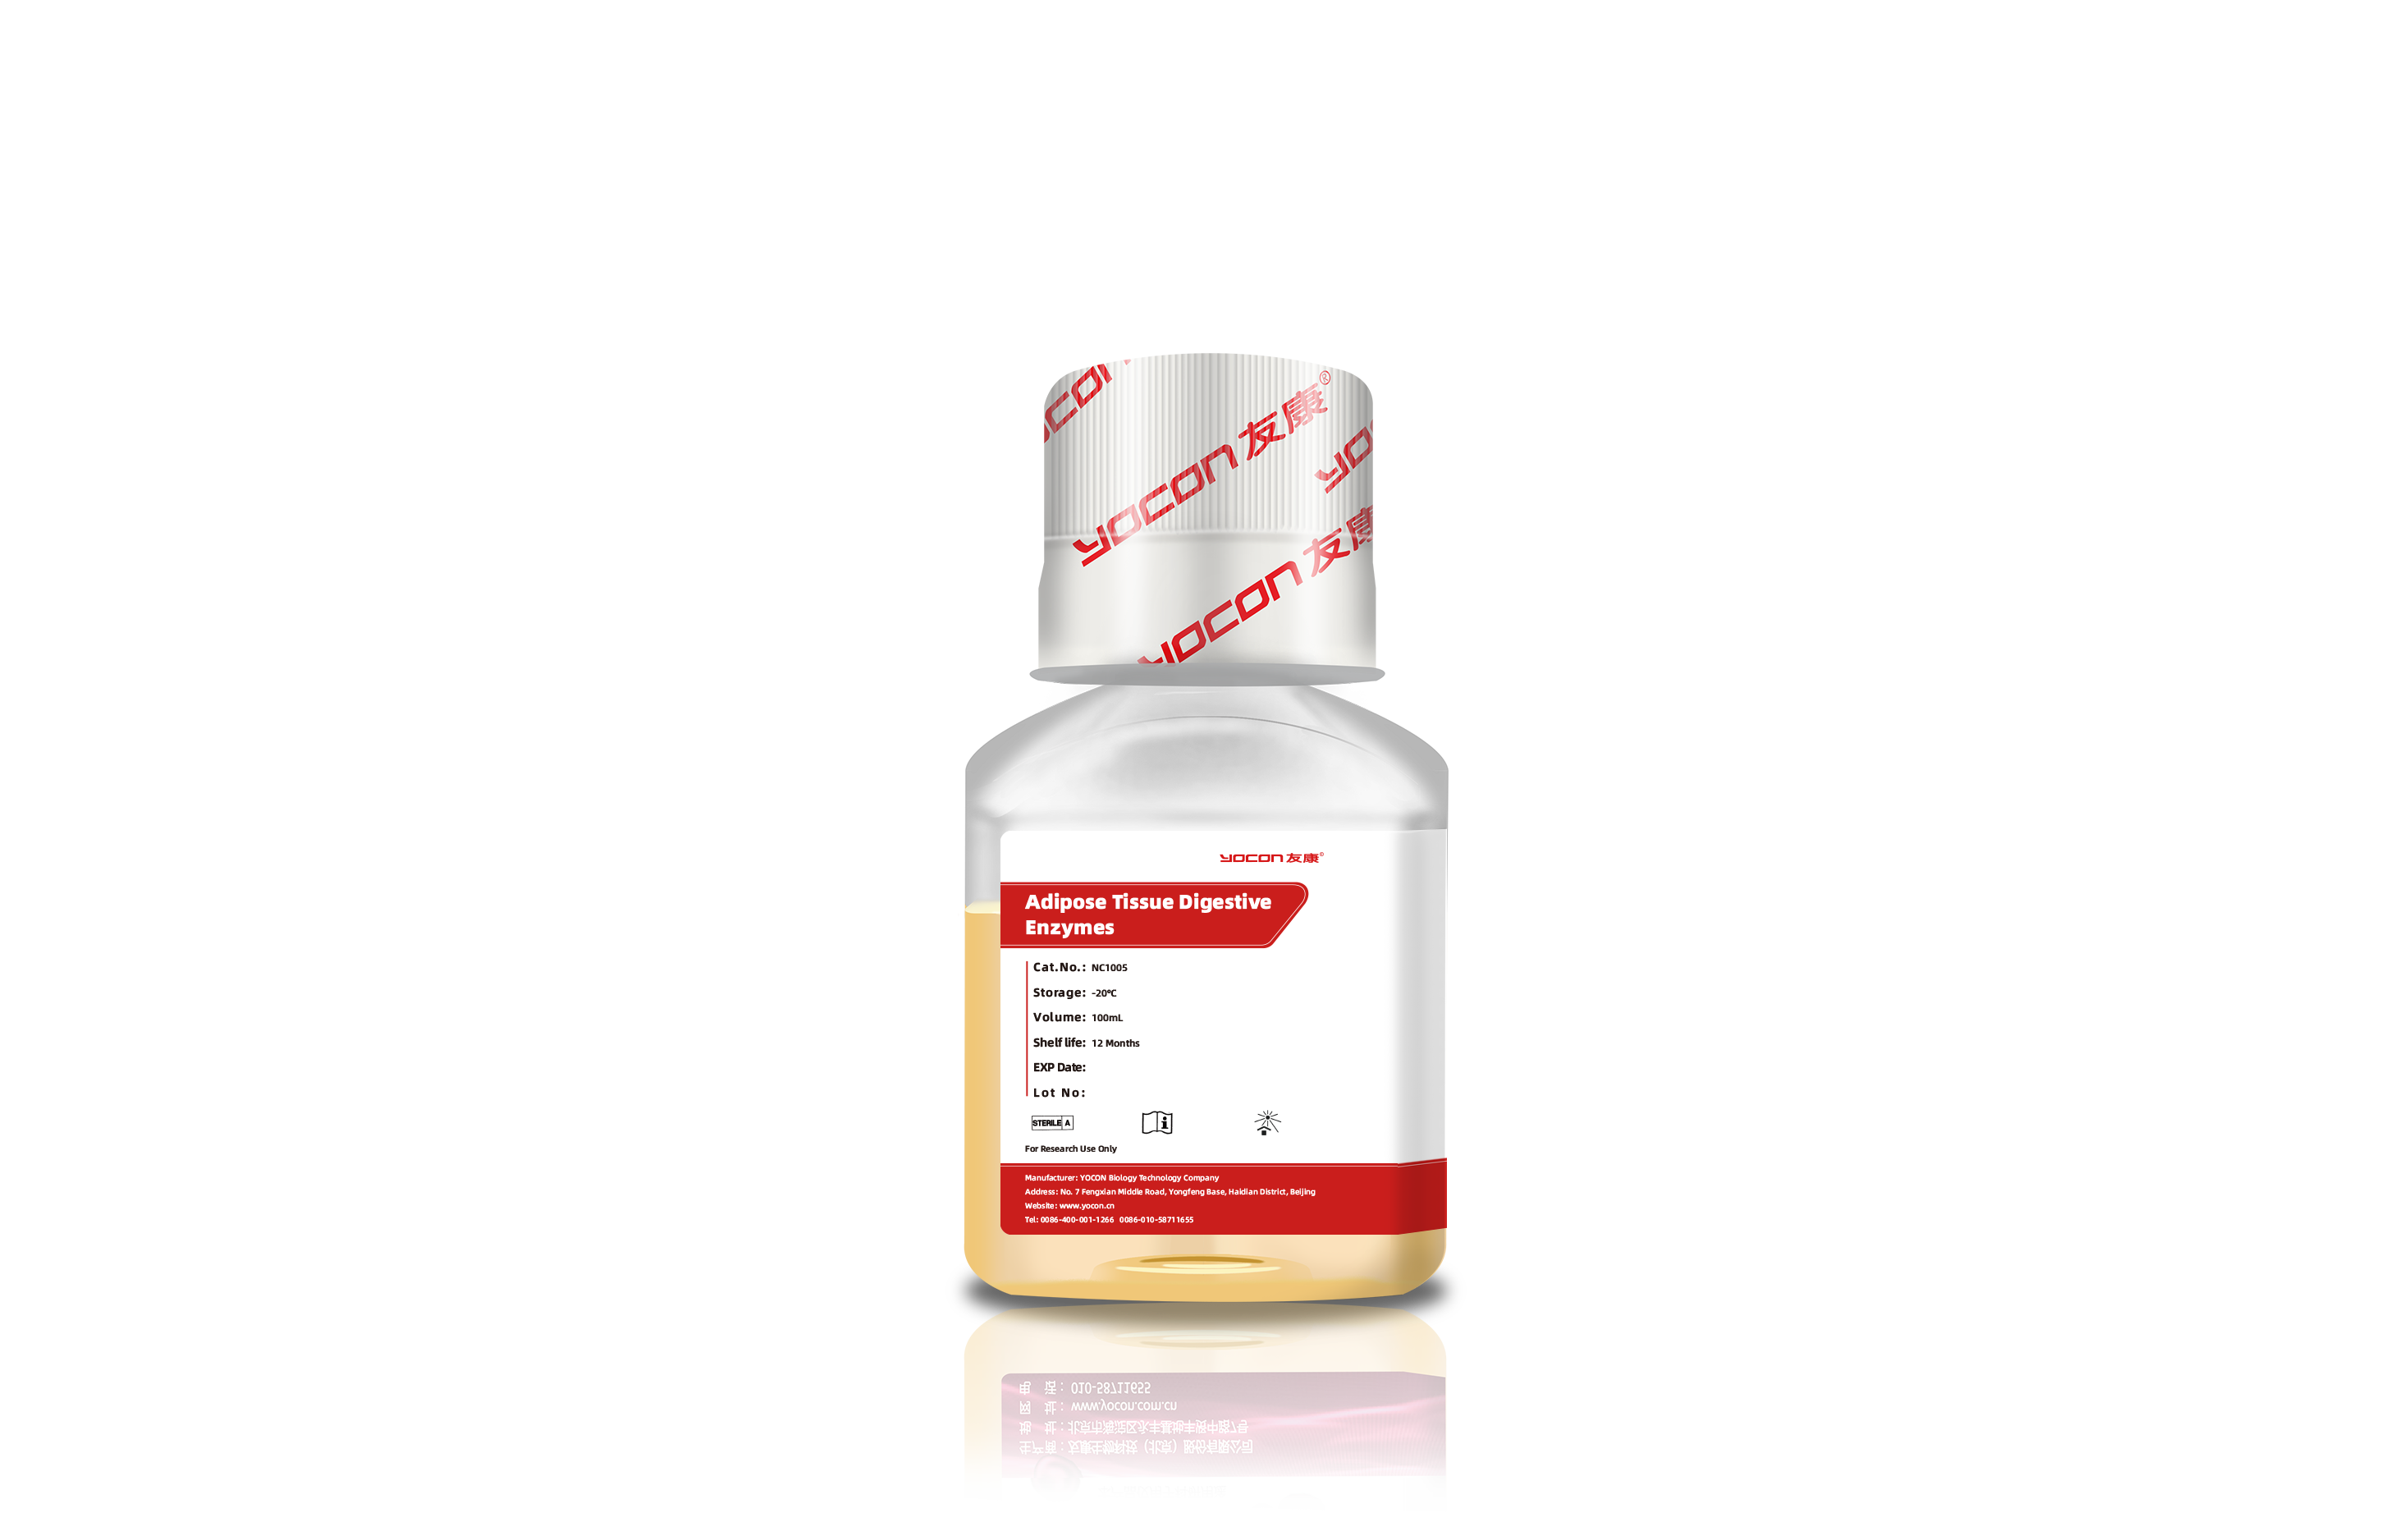 Adipose Tissue Digestive Enzymes